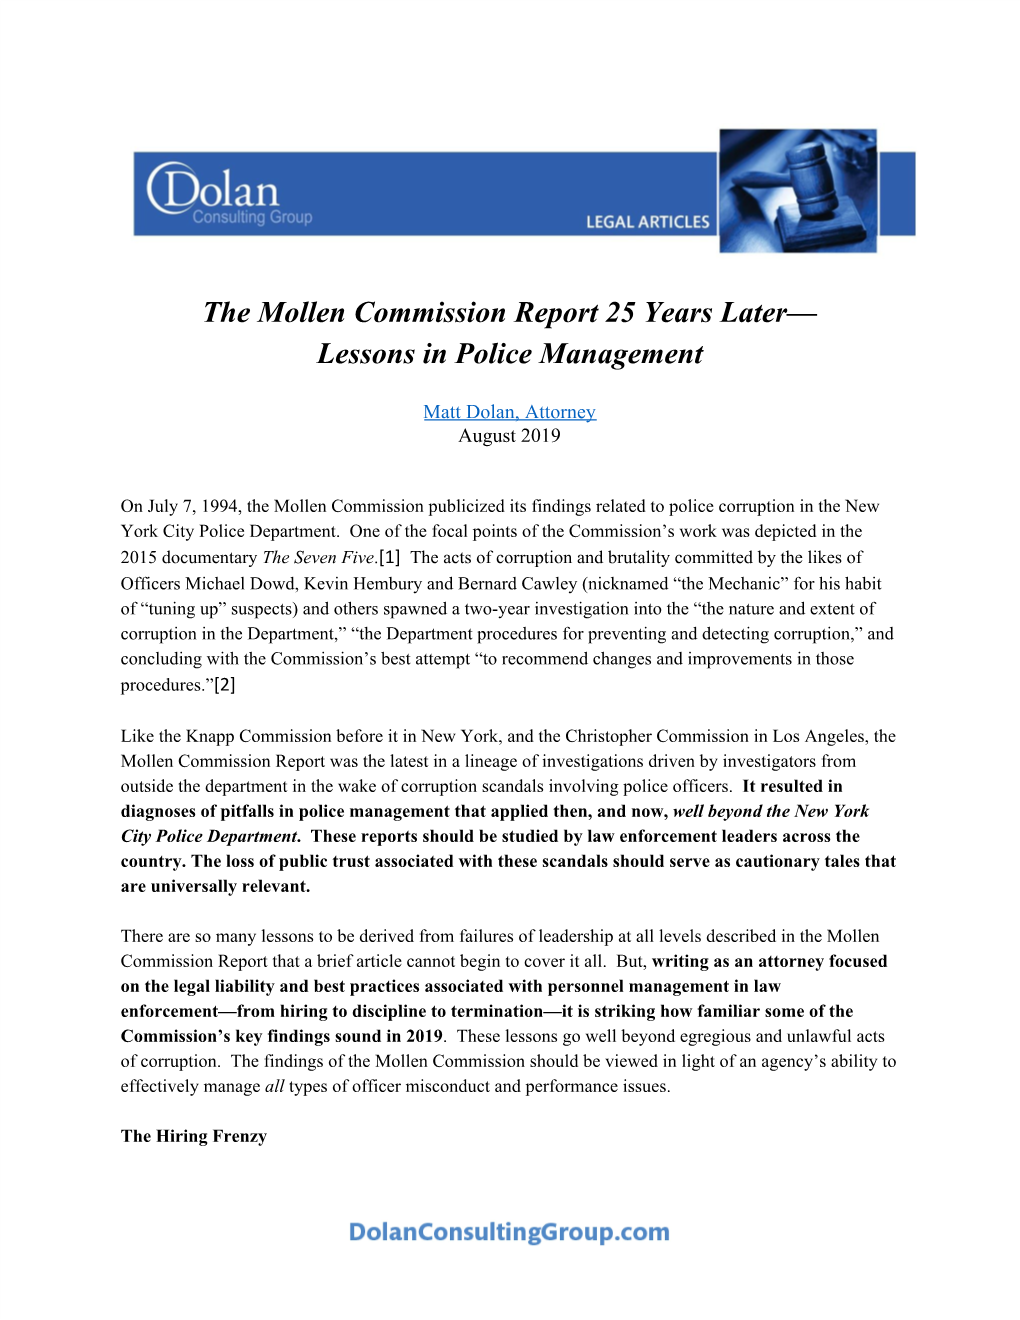 The Mollen Commission Report 25 Years Later— Lessons in Police Management